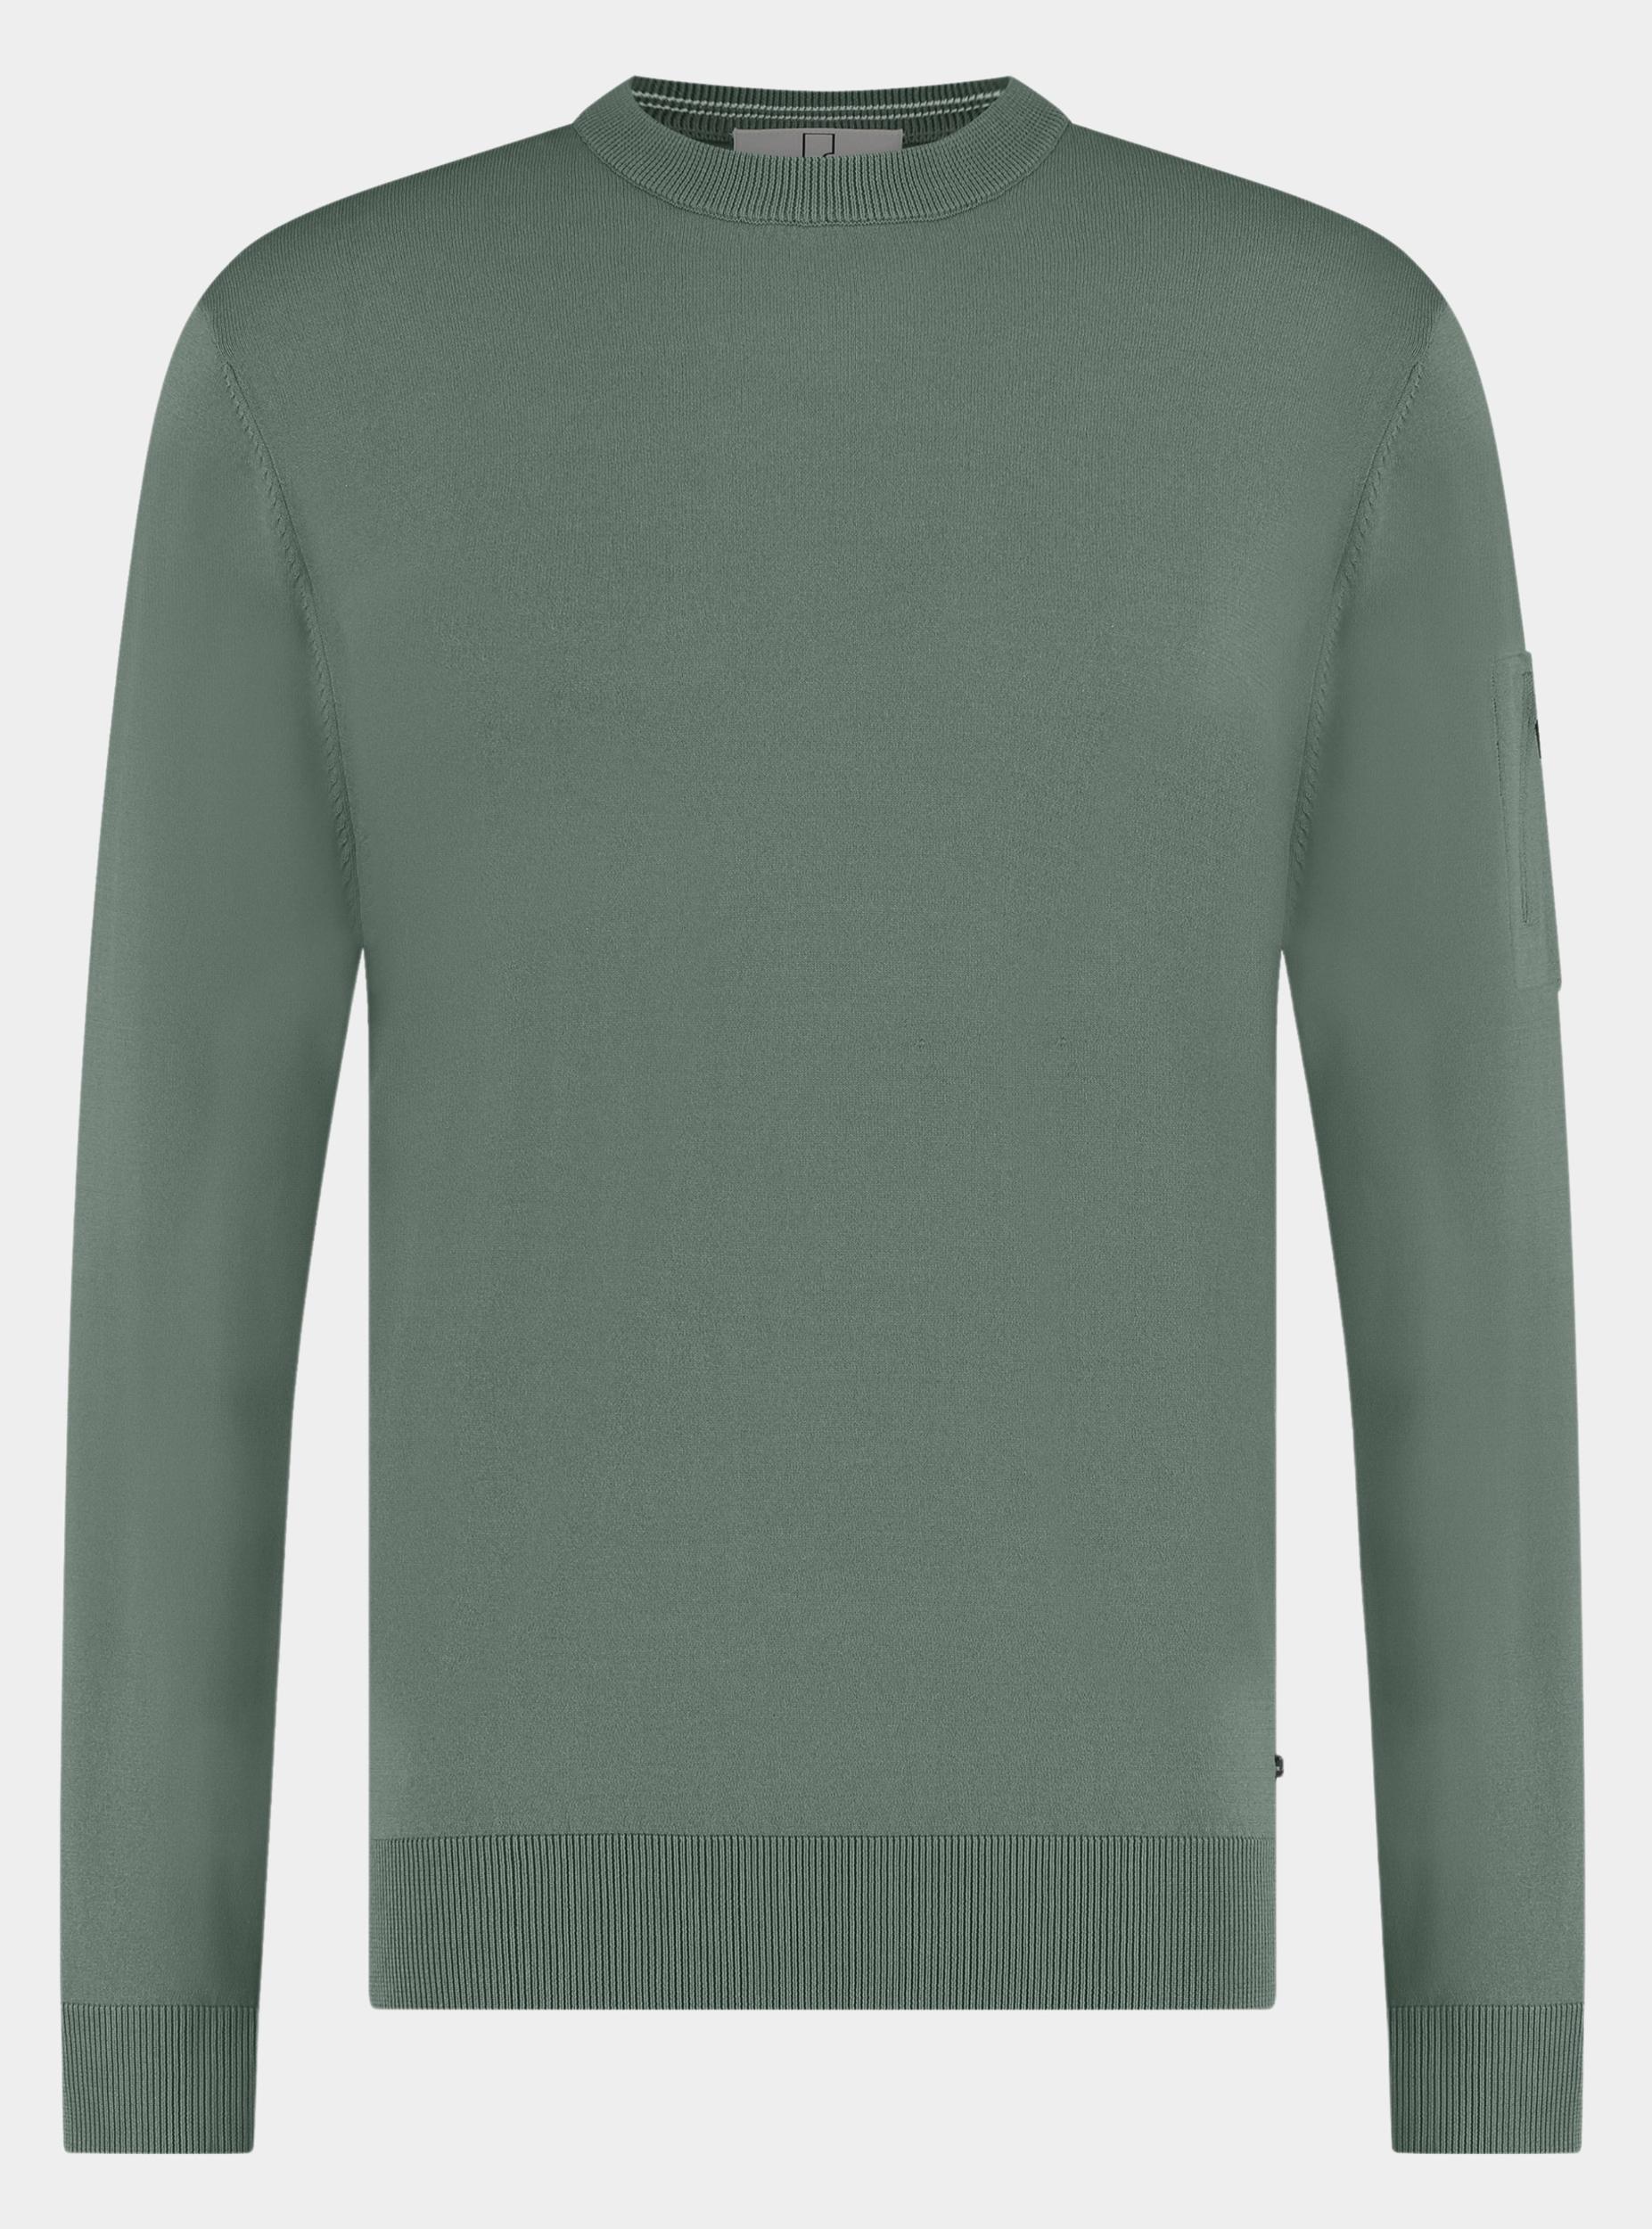 Born With Appetite Pullover Groen Pipa - Pullover Rn Stretch 23305PI72/903 modern green